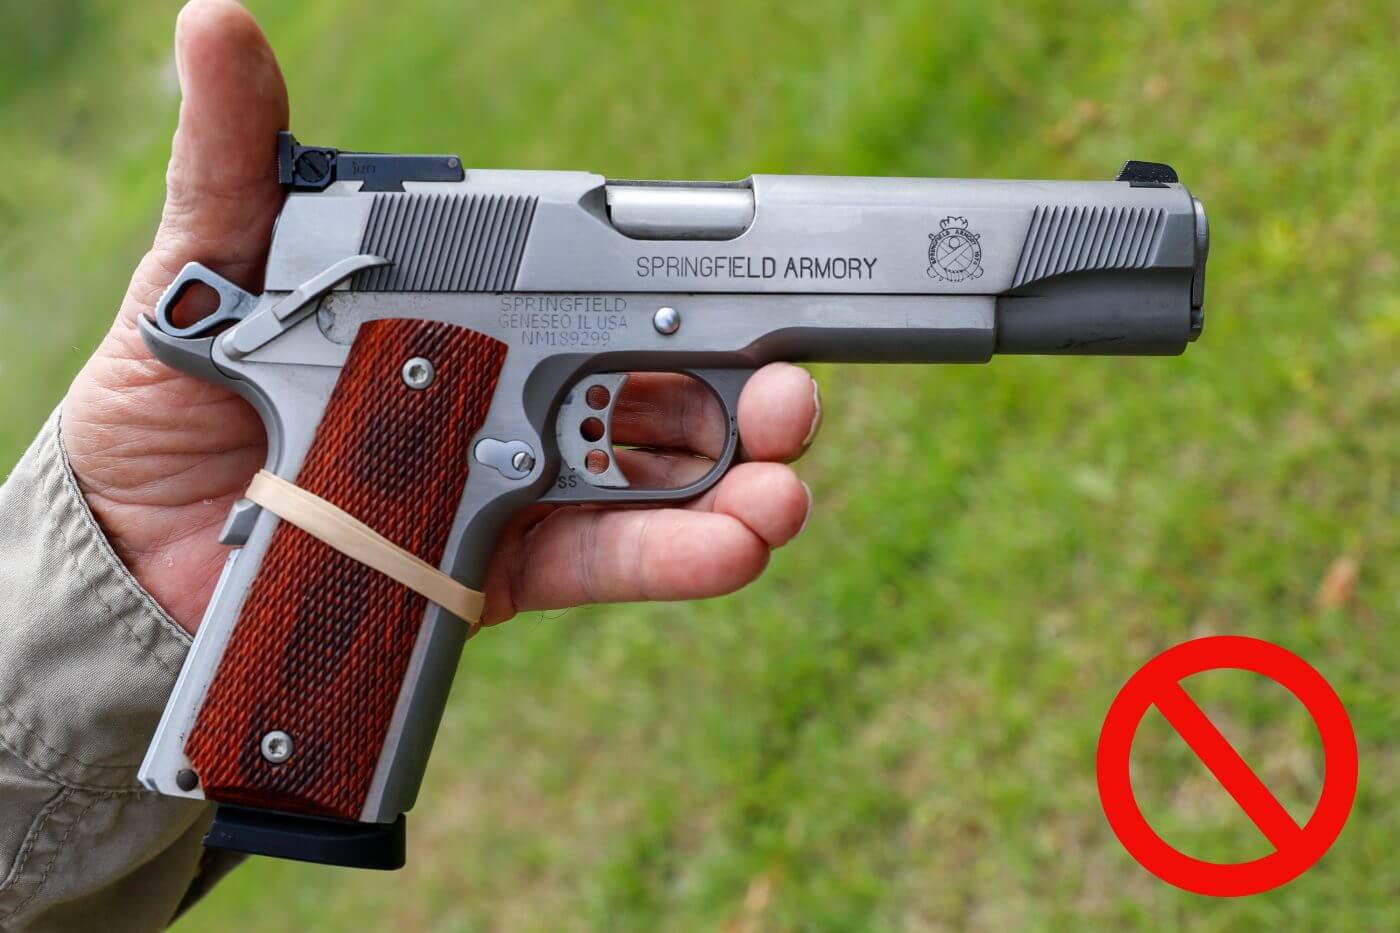 In this photograph, the author illustrates the problem with deactivating the grip safety on a pistol.